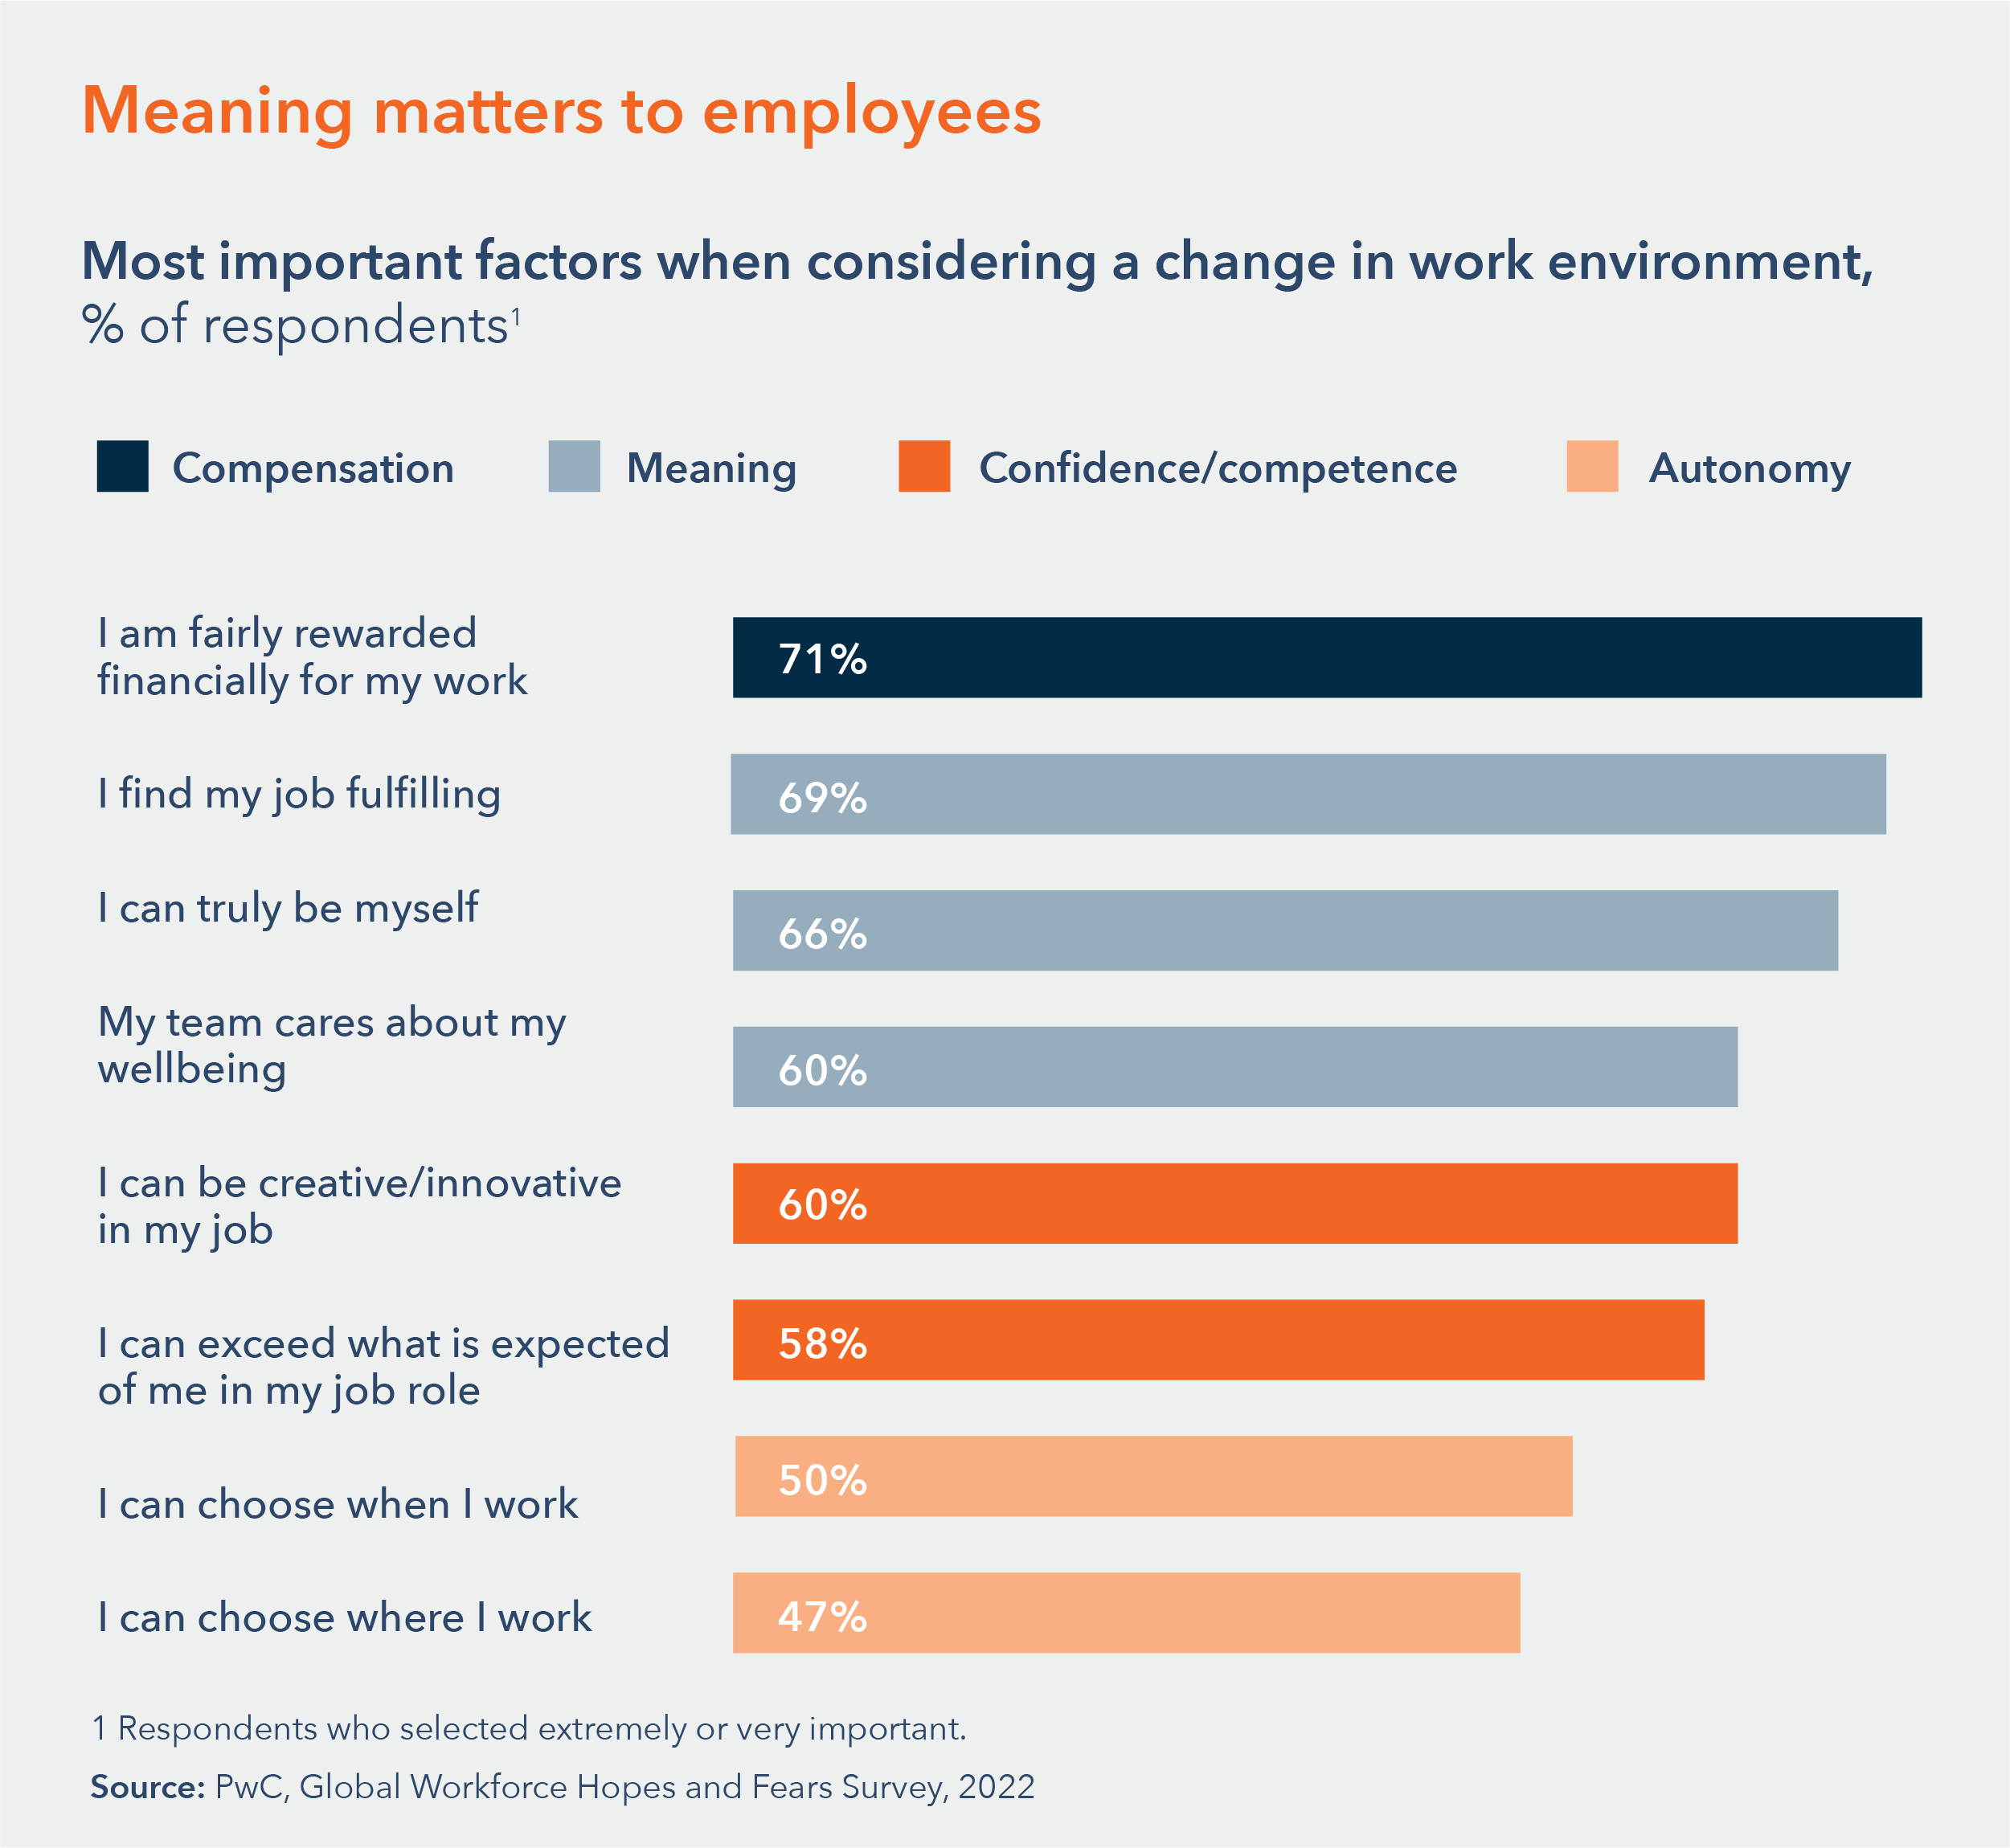 Meaning matters to employees in work environment